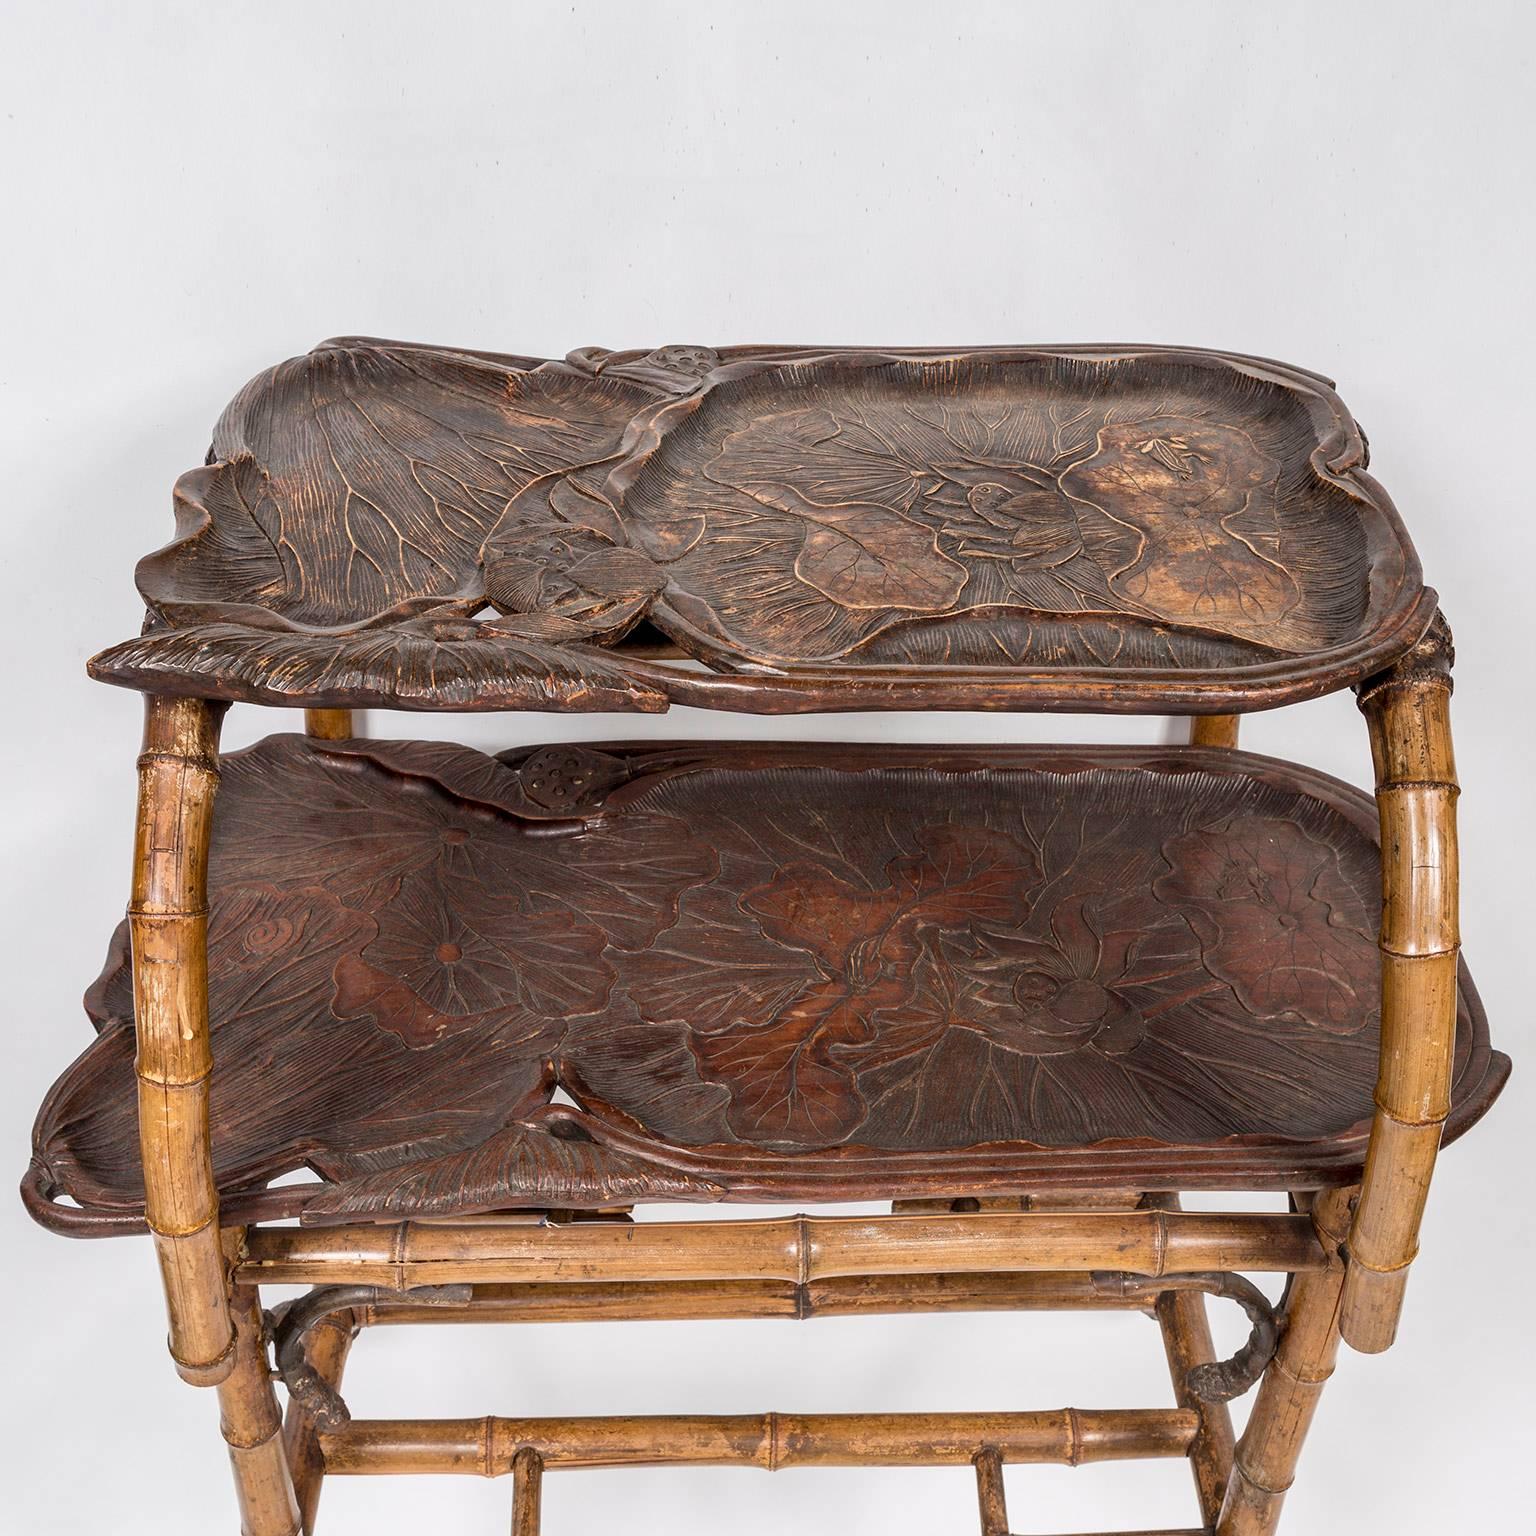 19th Century Japanese Meiji Period Bamboo and Carved Wood Tea Table with Lily Leaves and Fro